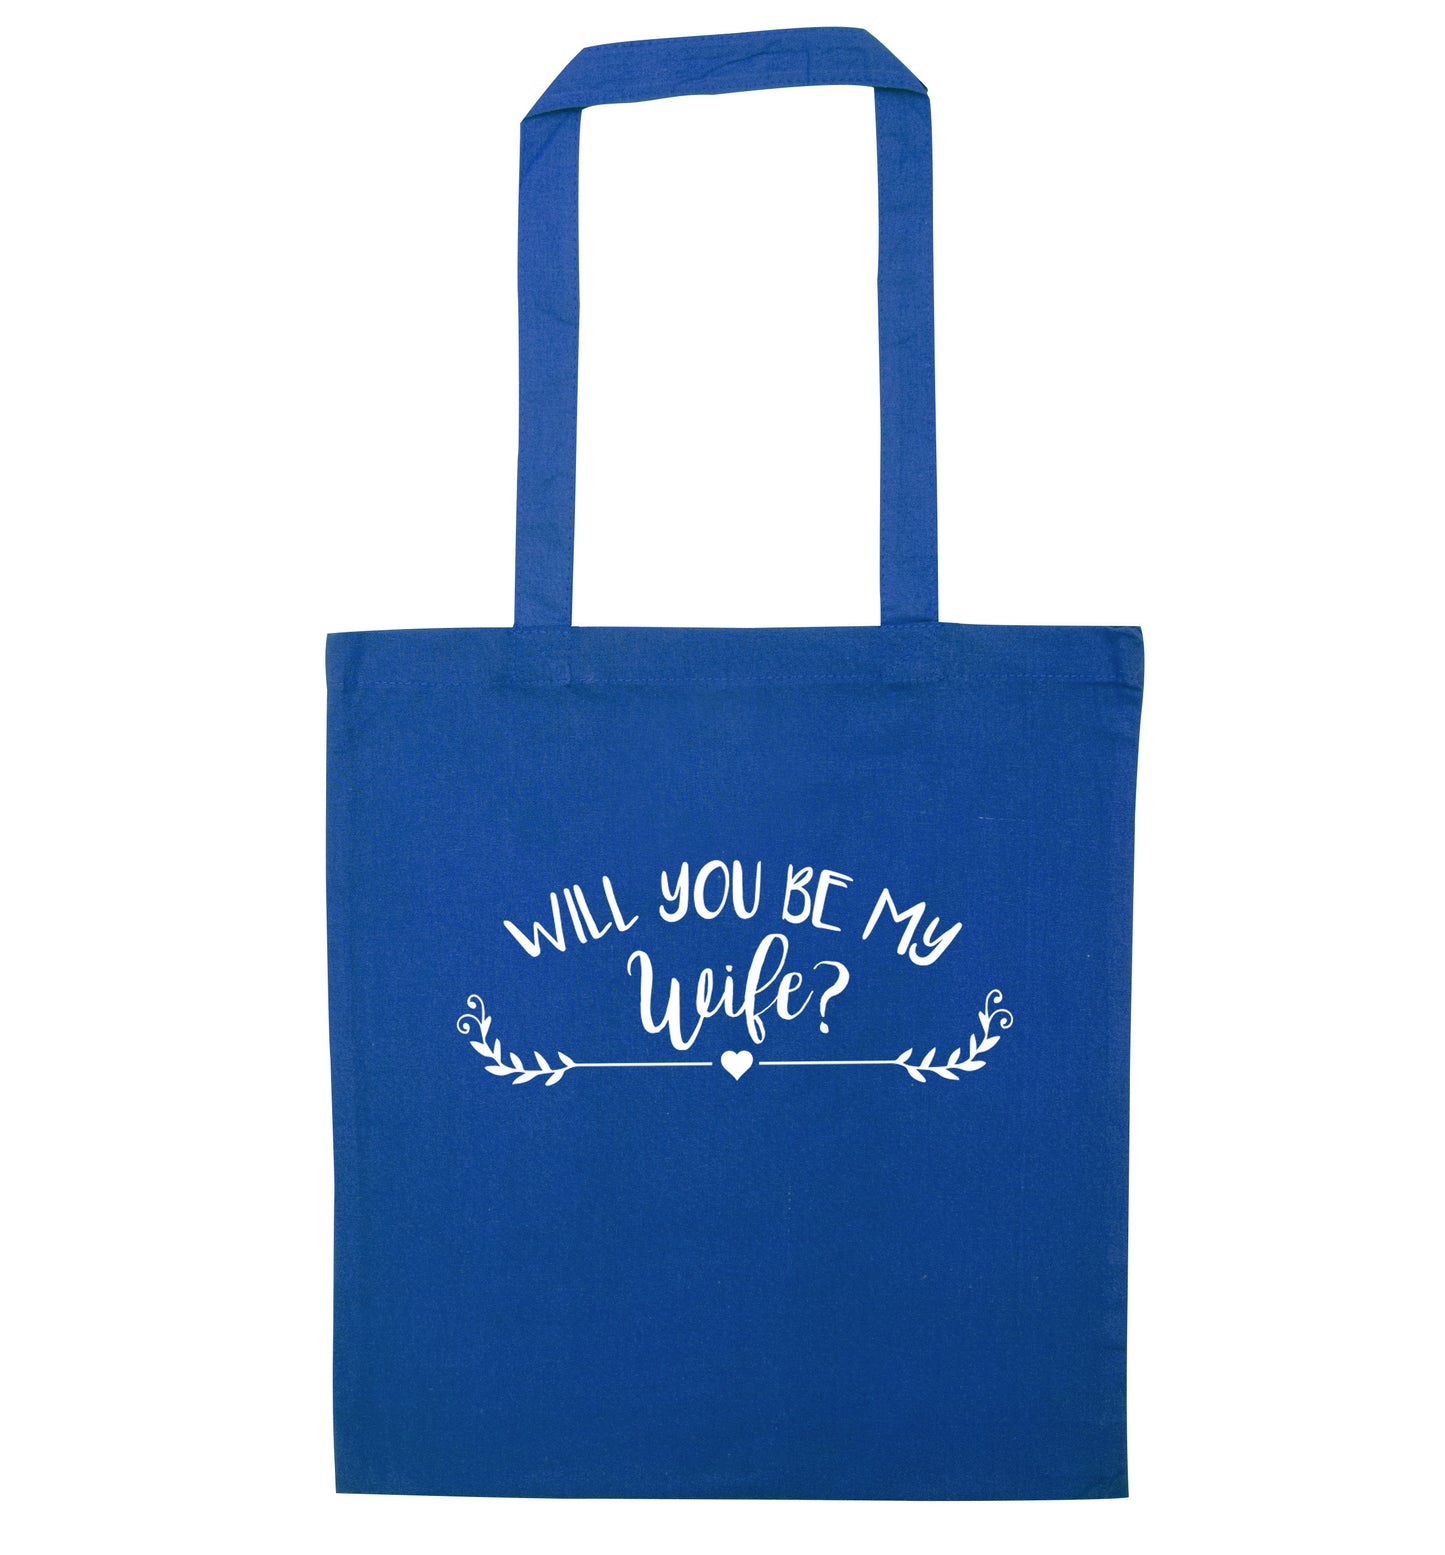 Will you be my wife? blue tote bag